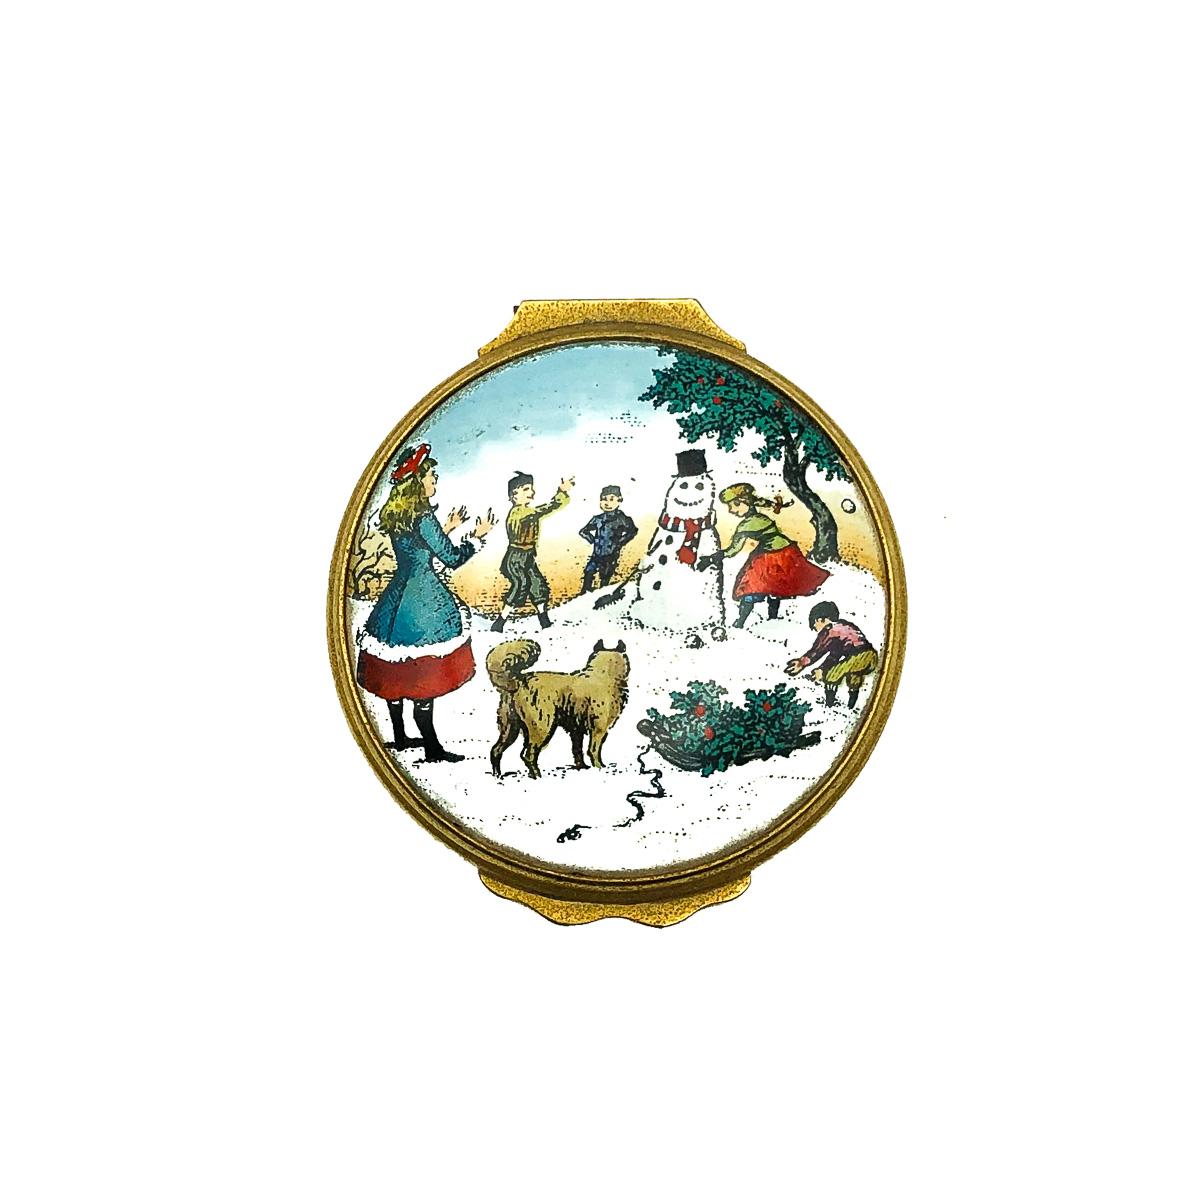 The perfect keepsake. A Vintage Bilston & Battersea Enamel 1979 Christmas Box. Crafted in glass enamel and gold plate. In very good vintage condition. Approx. 4cms wide. A wonderful vintage Christmas keepsake for Christmas's to come.

Established in